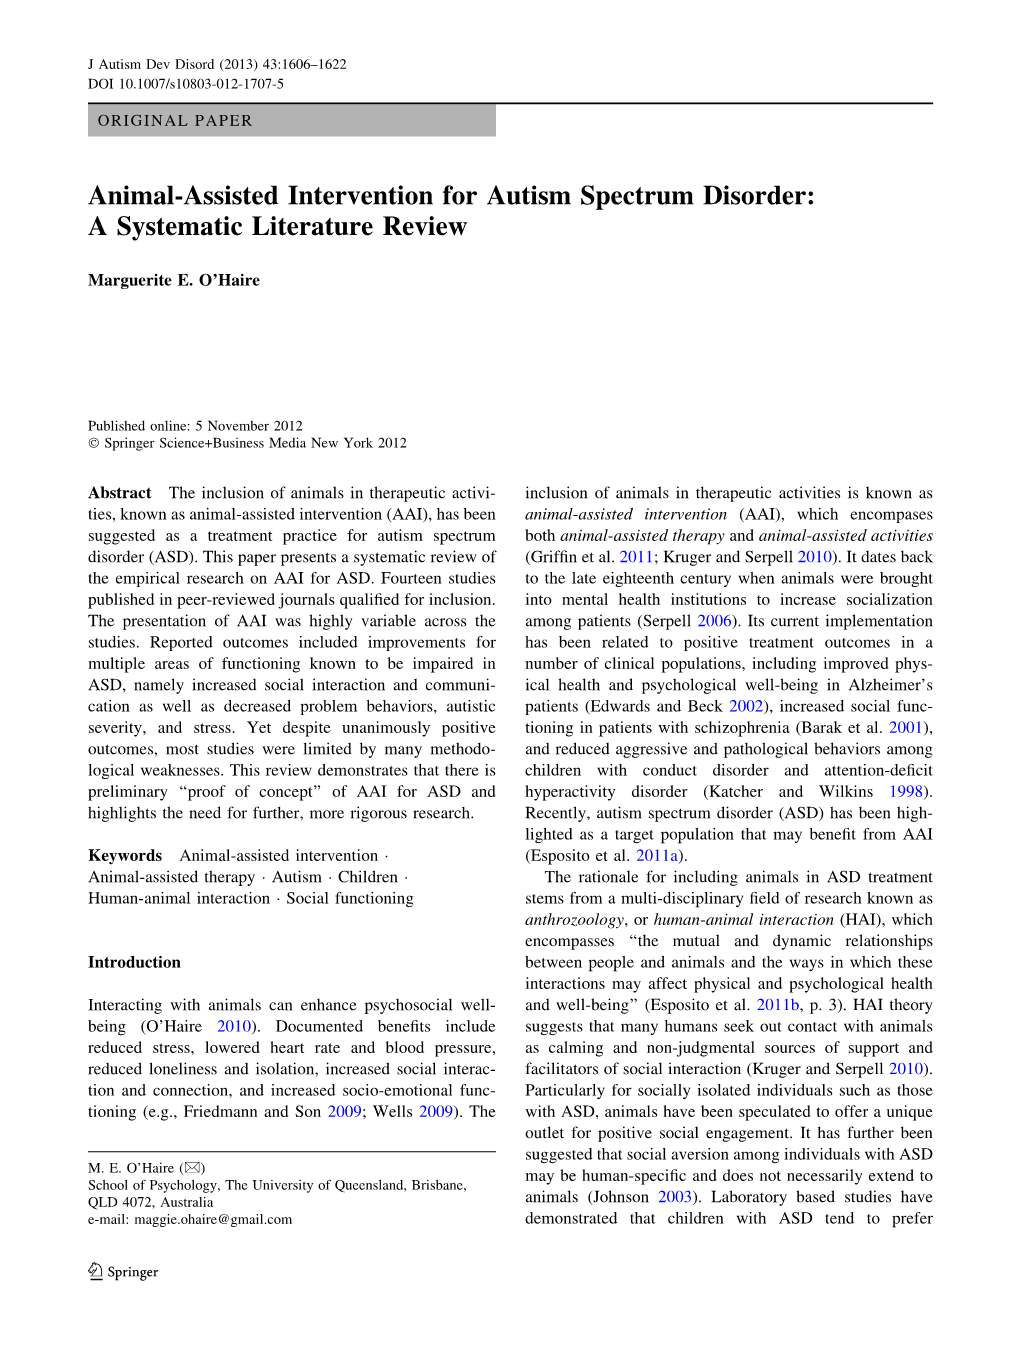 Animal-Assisted Intervention for Autism Spectrum Disorder: a Systematic Literature Review